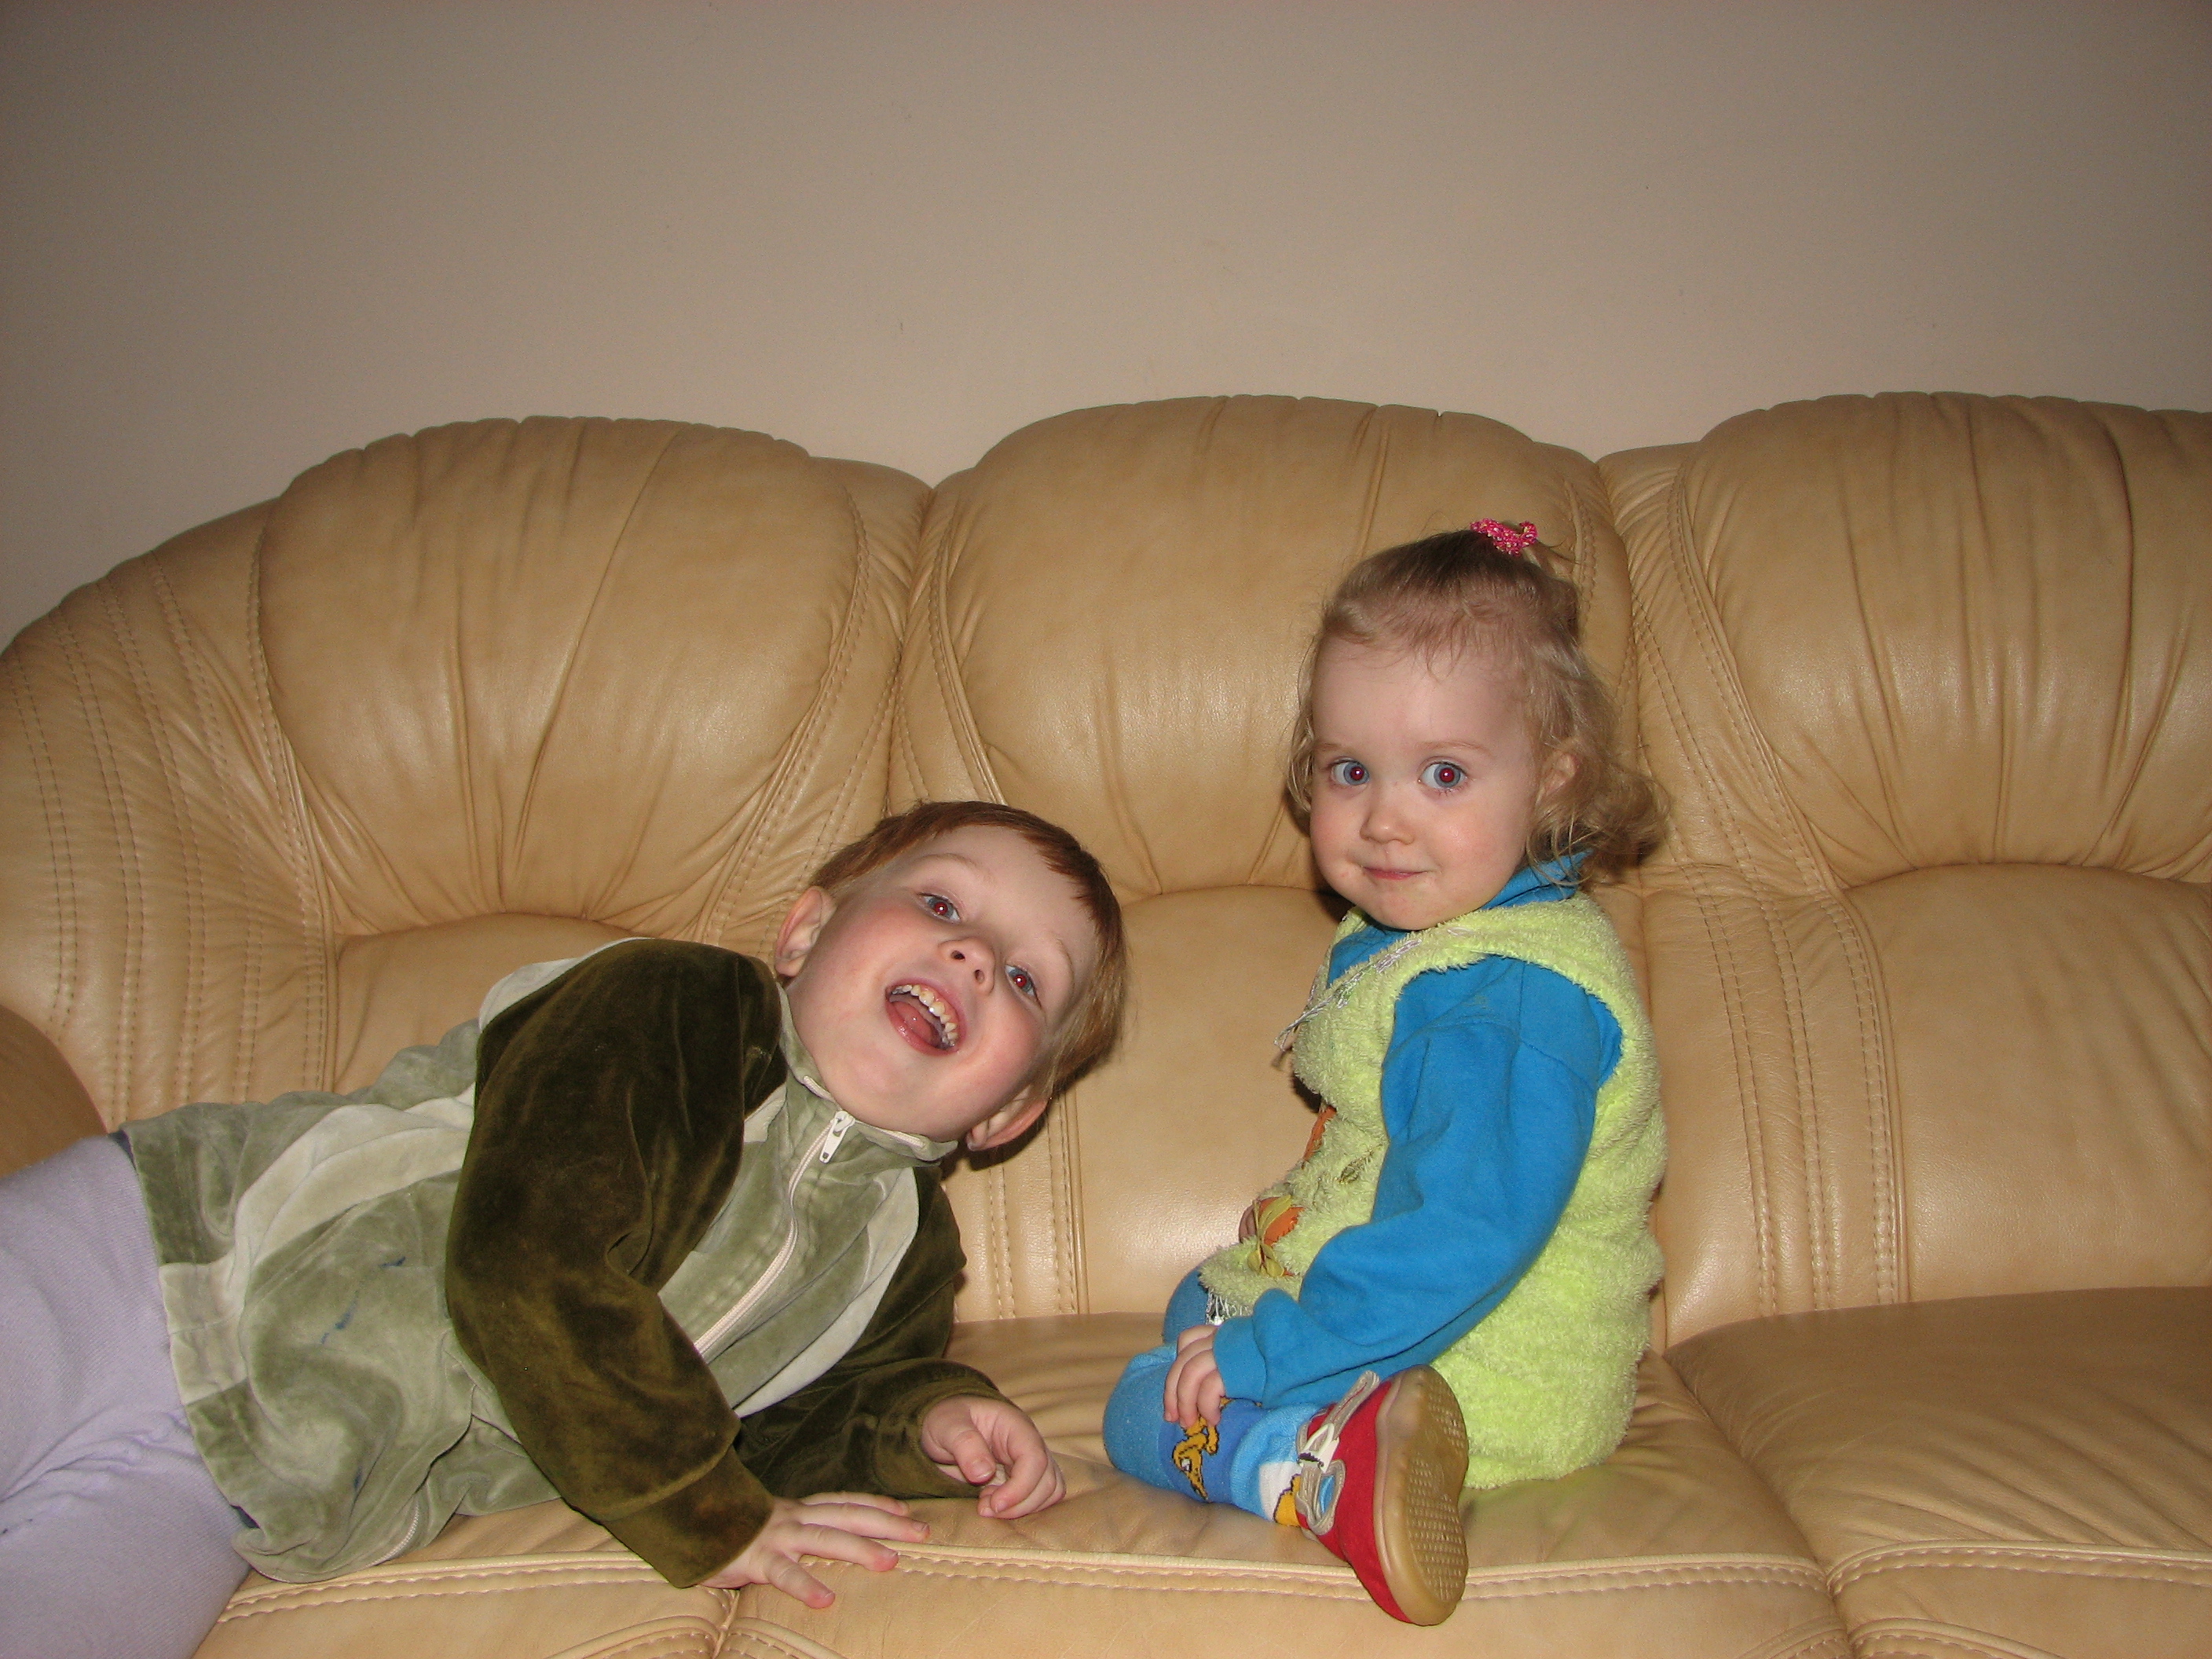 Brother and sister, small children, on a leather sofa